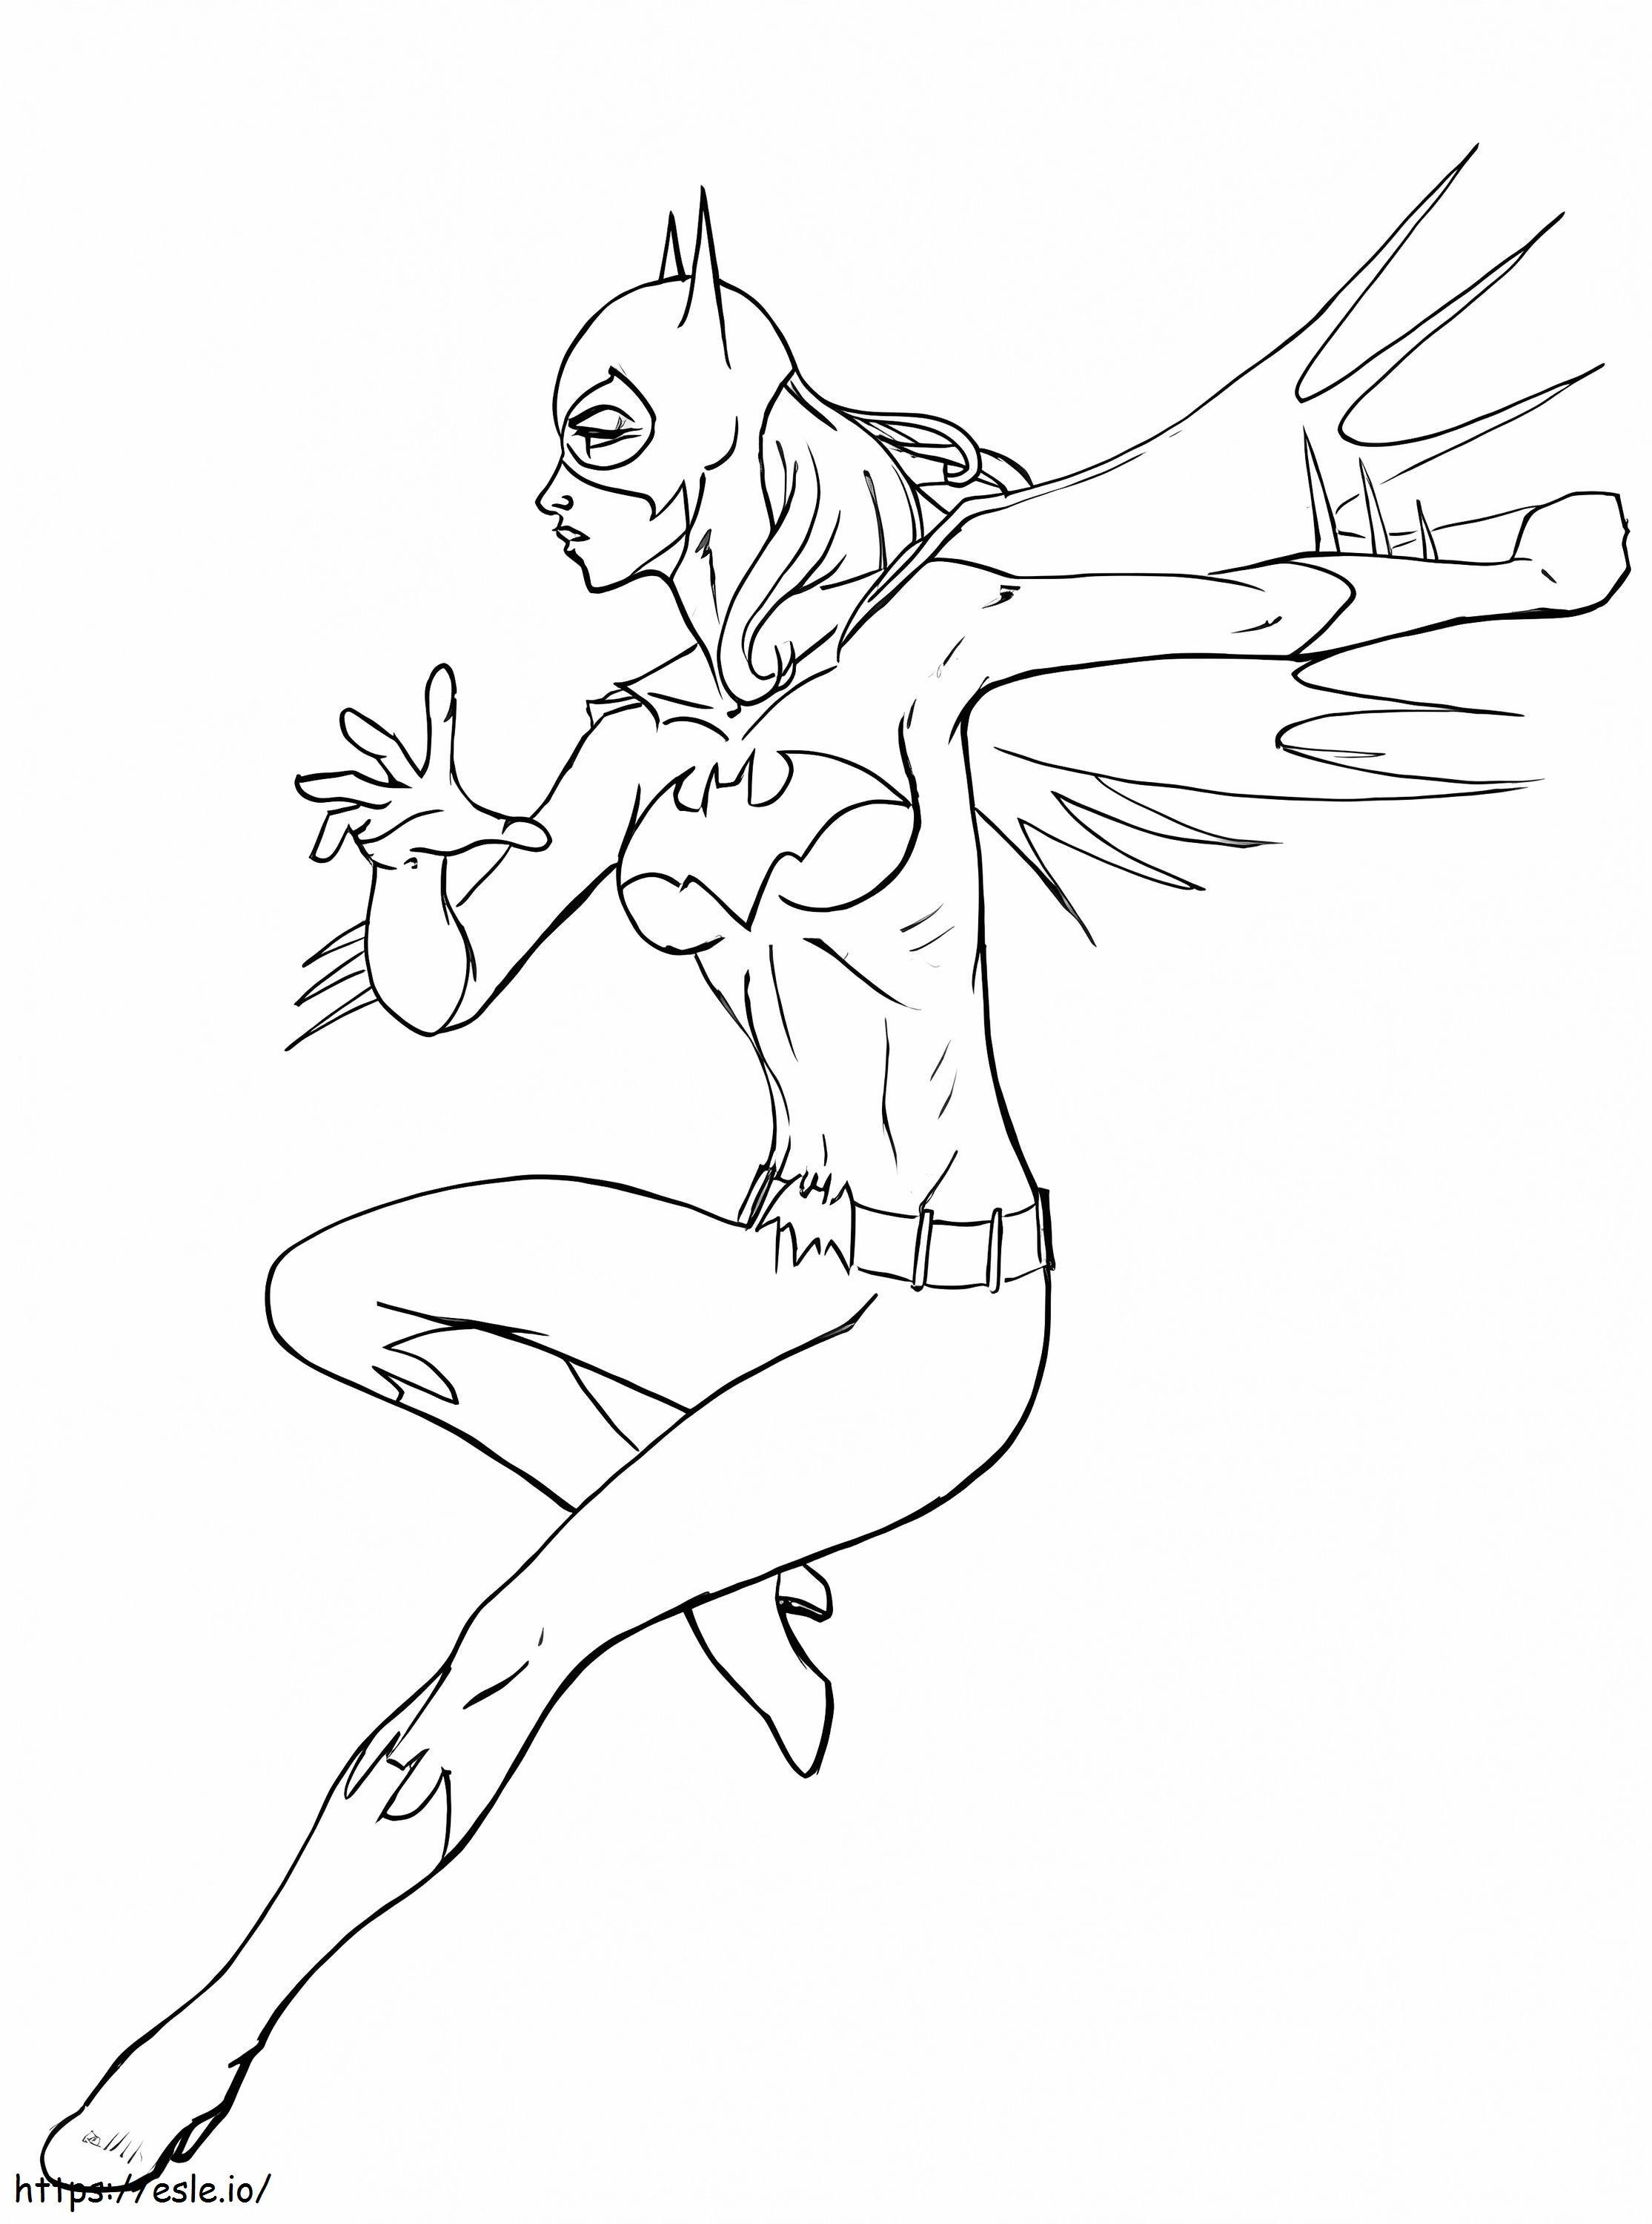 Batgirl Fighting coloring page